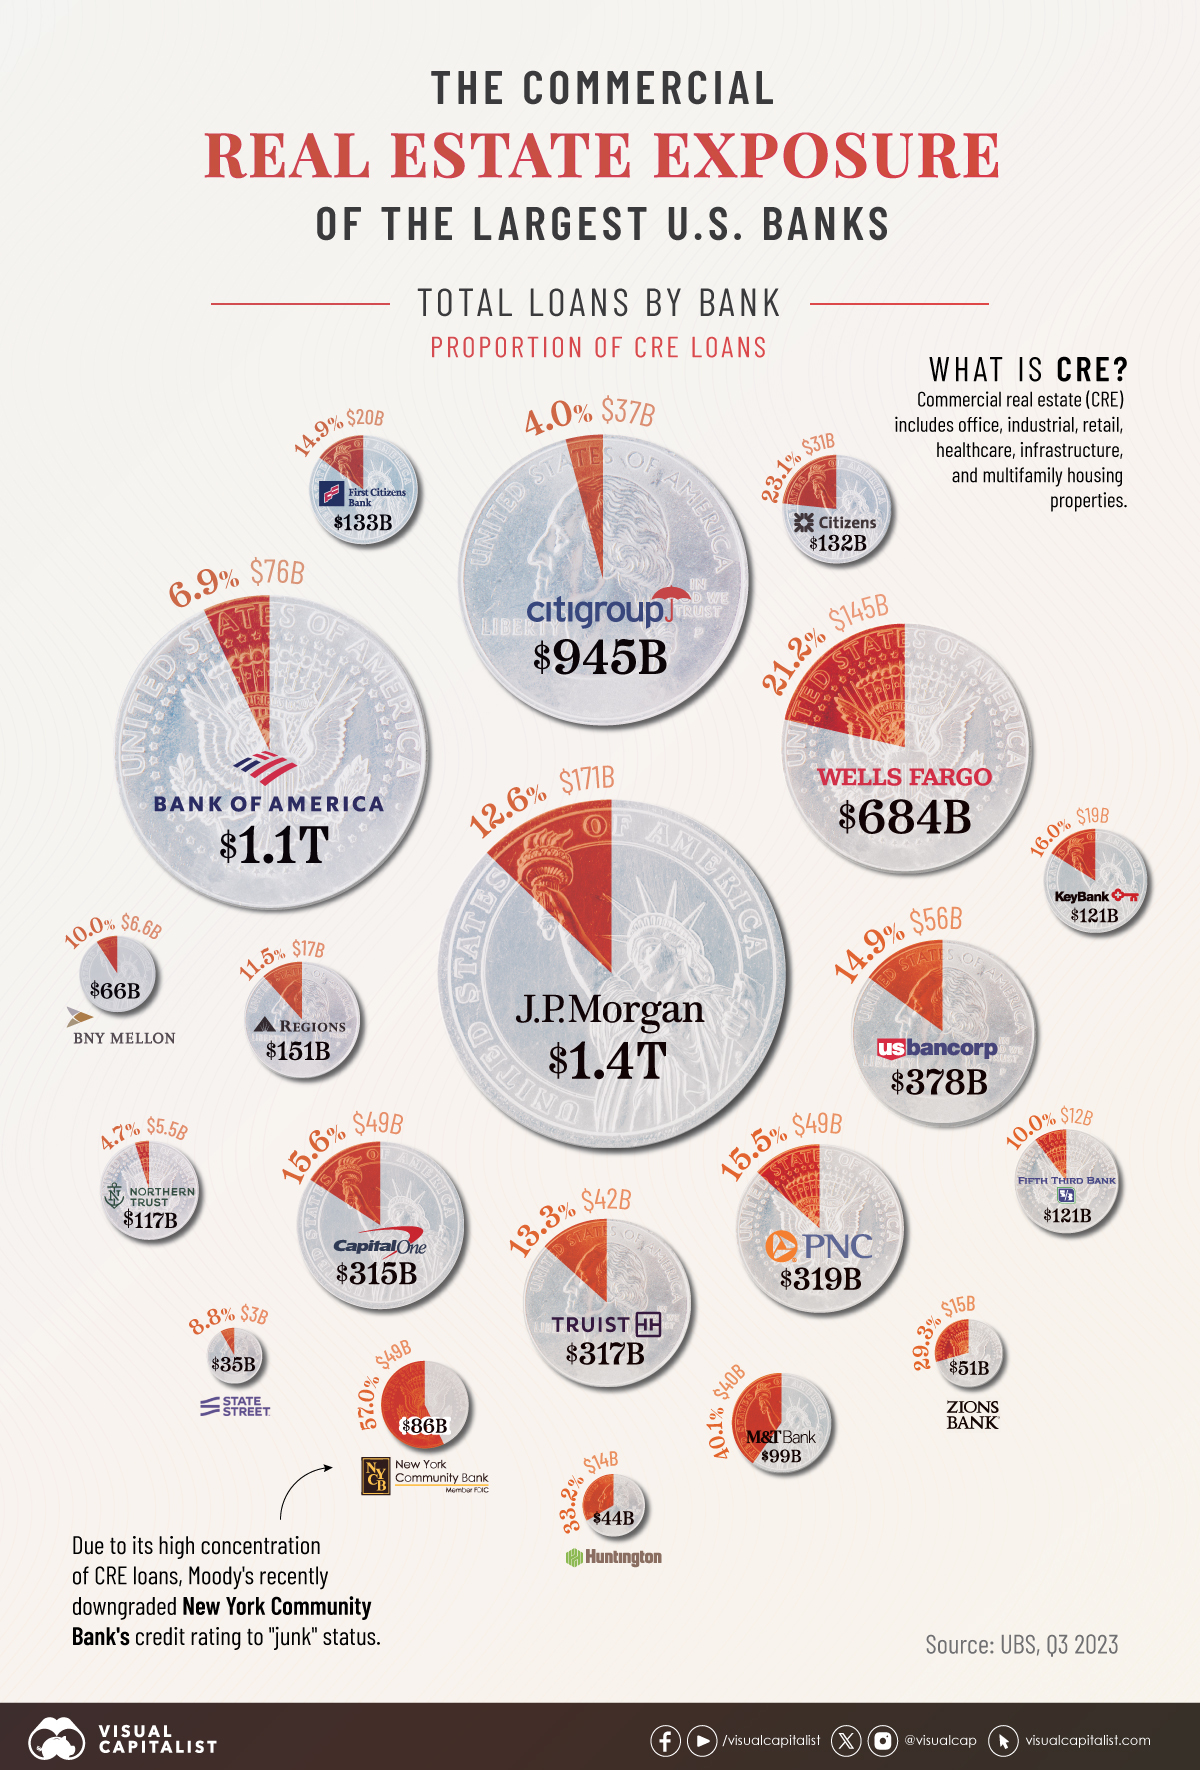 This pie chart graphic shows commercial property loan exposure across the 20 largest U.S. banks by assets.